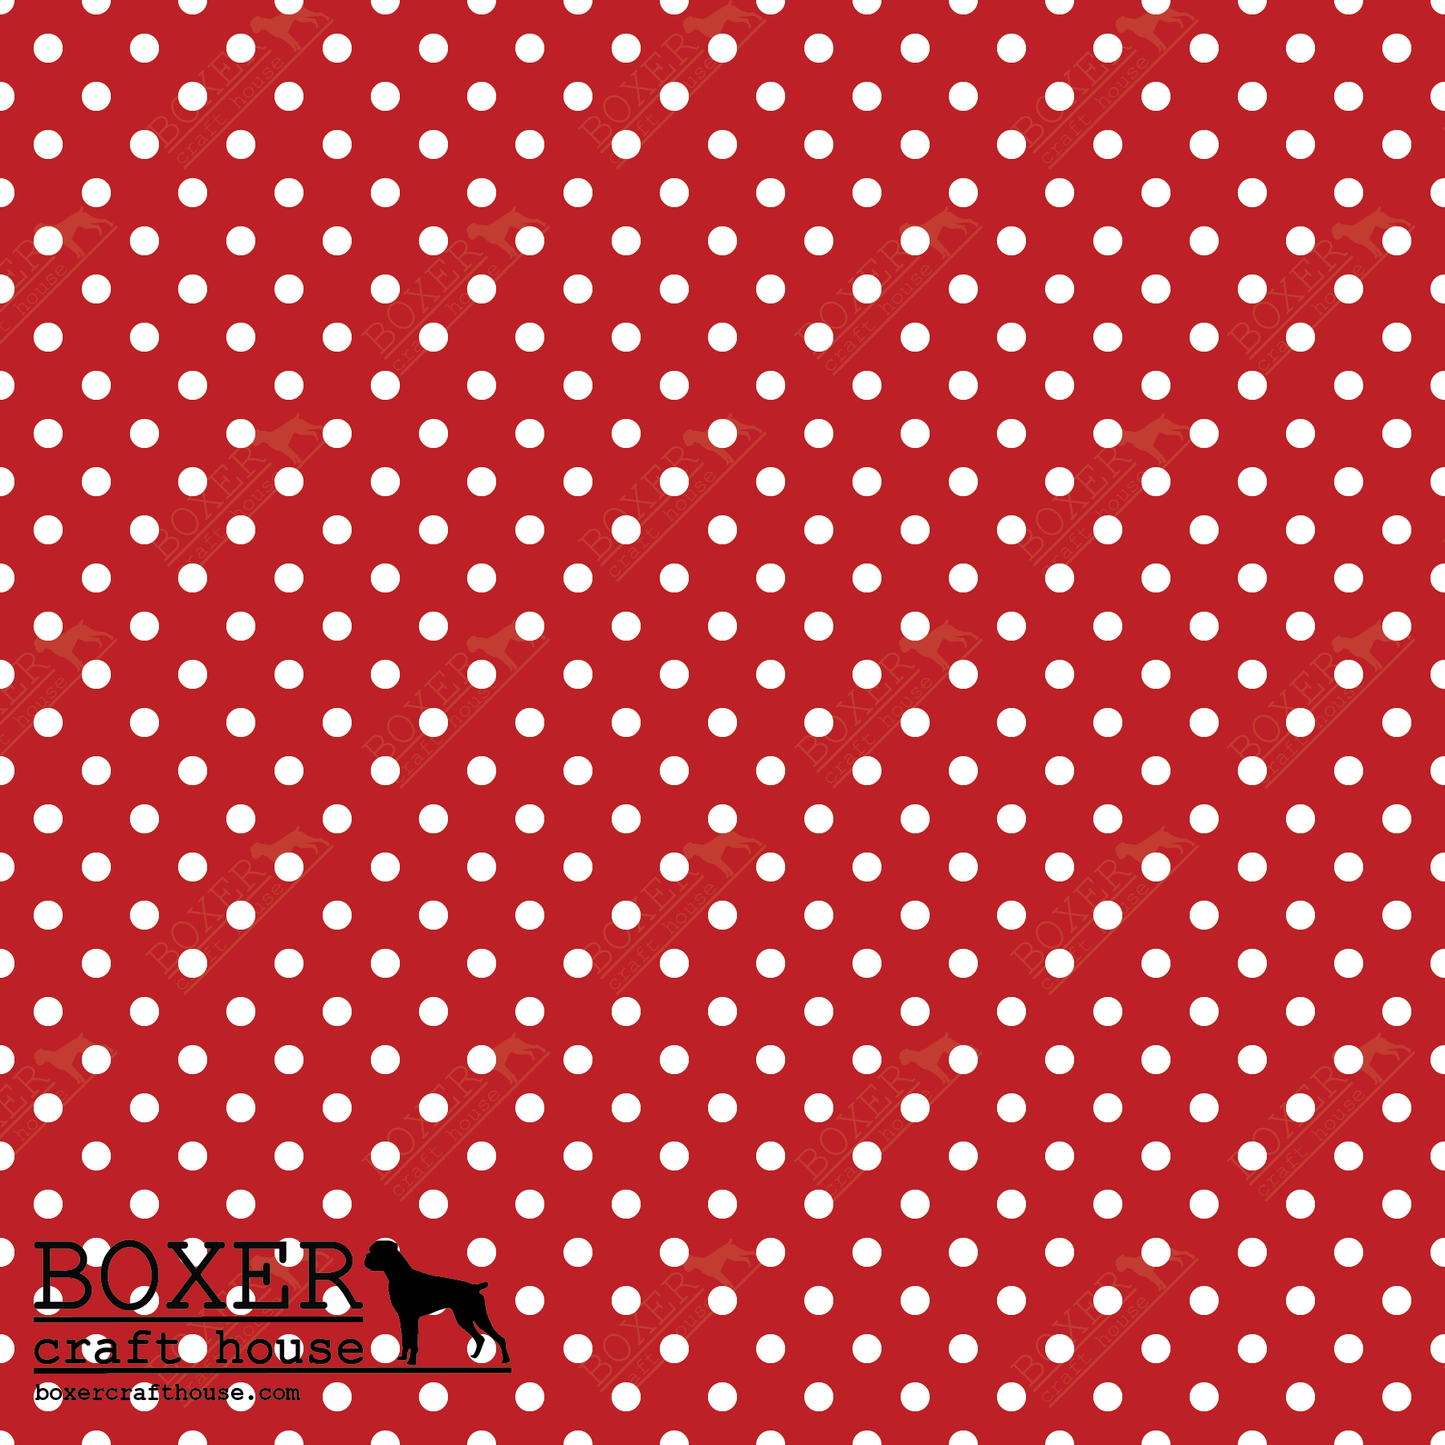 Dots 1/8" - Candy Apple Red